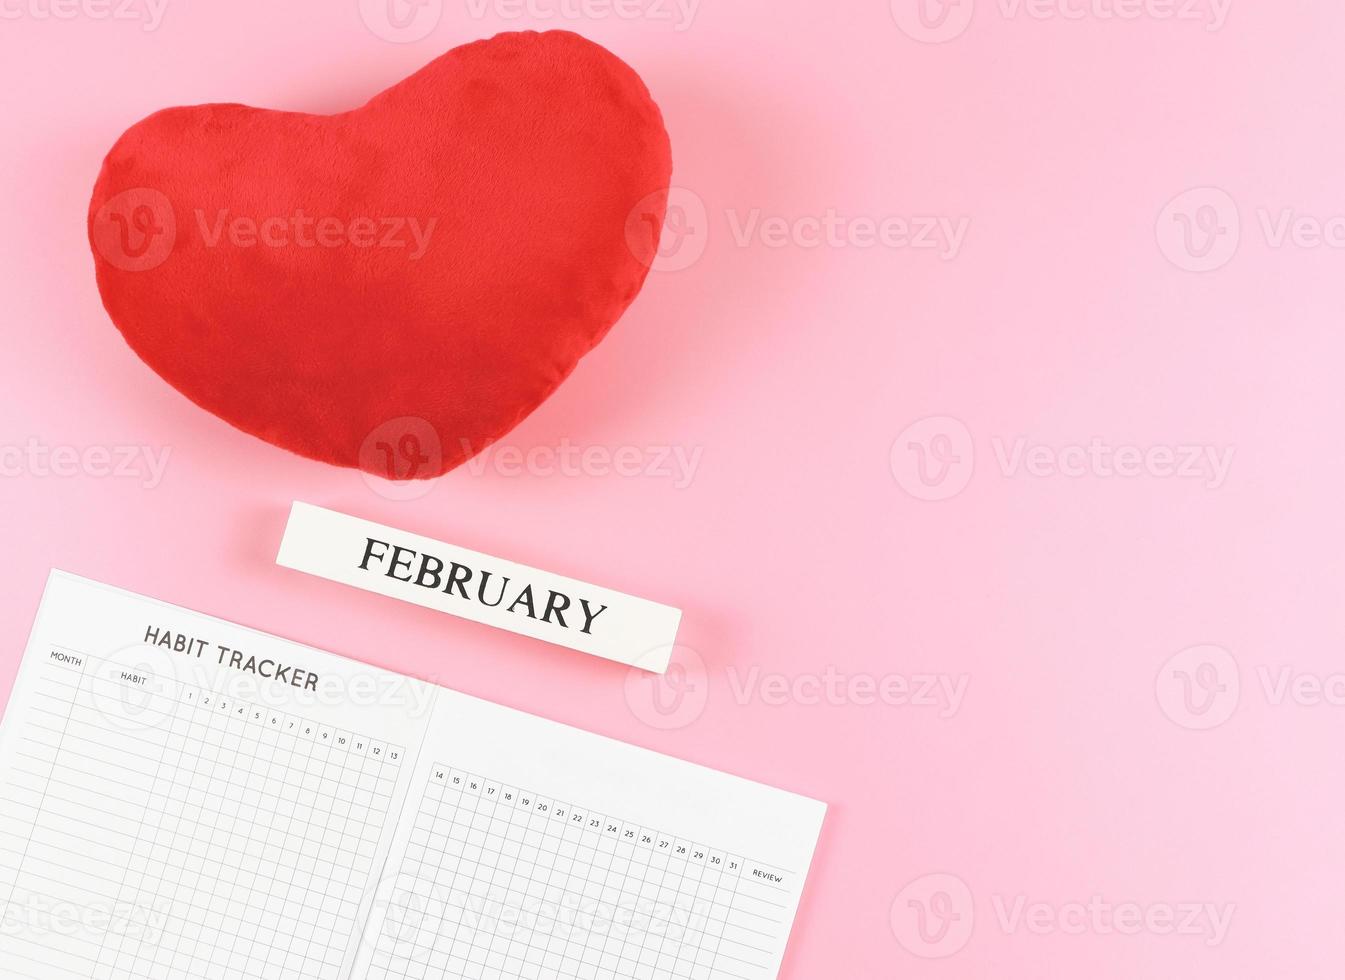 lat lay of habit tracker book, wooden calendar February,  red heart shape pillow on pink  background with copy space. photo